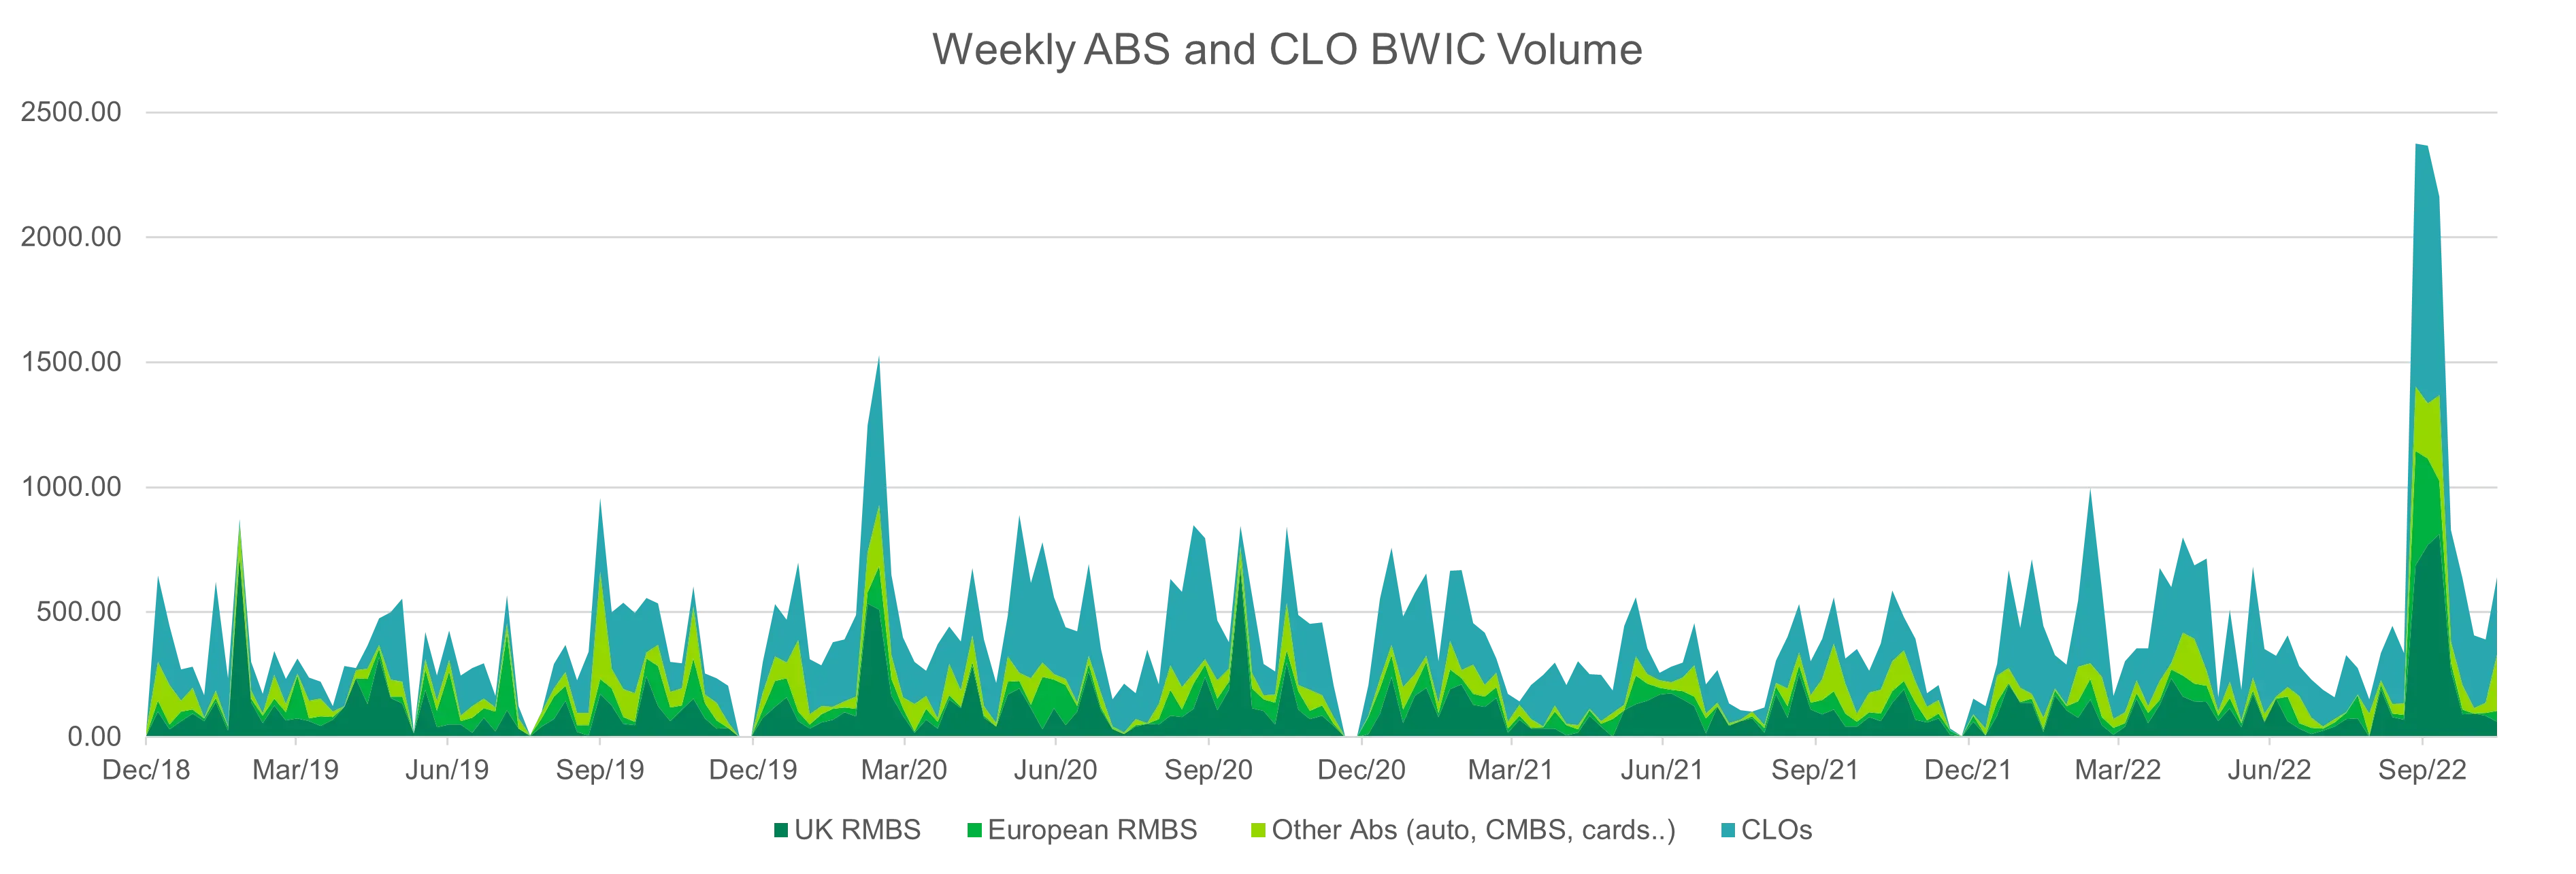 Weekly ABS and CLO BWIC Volume_0